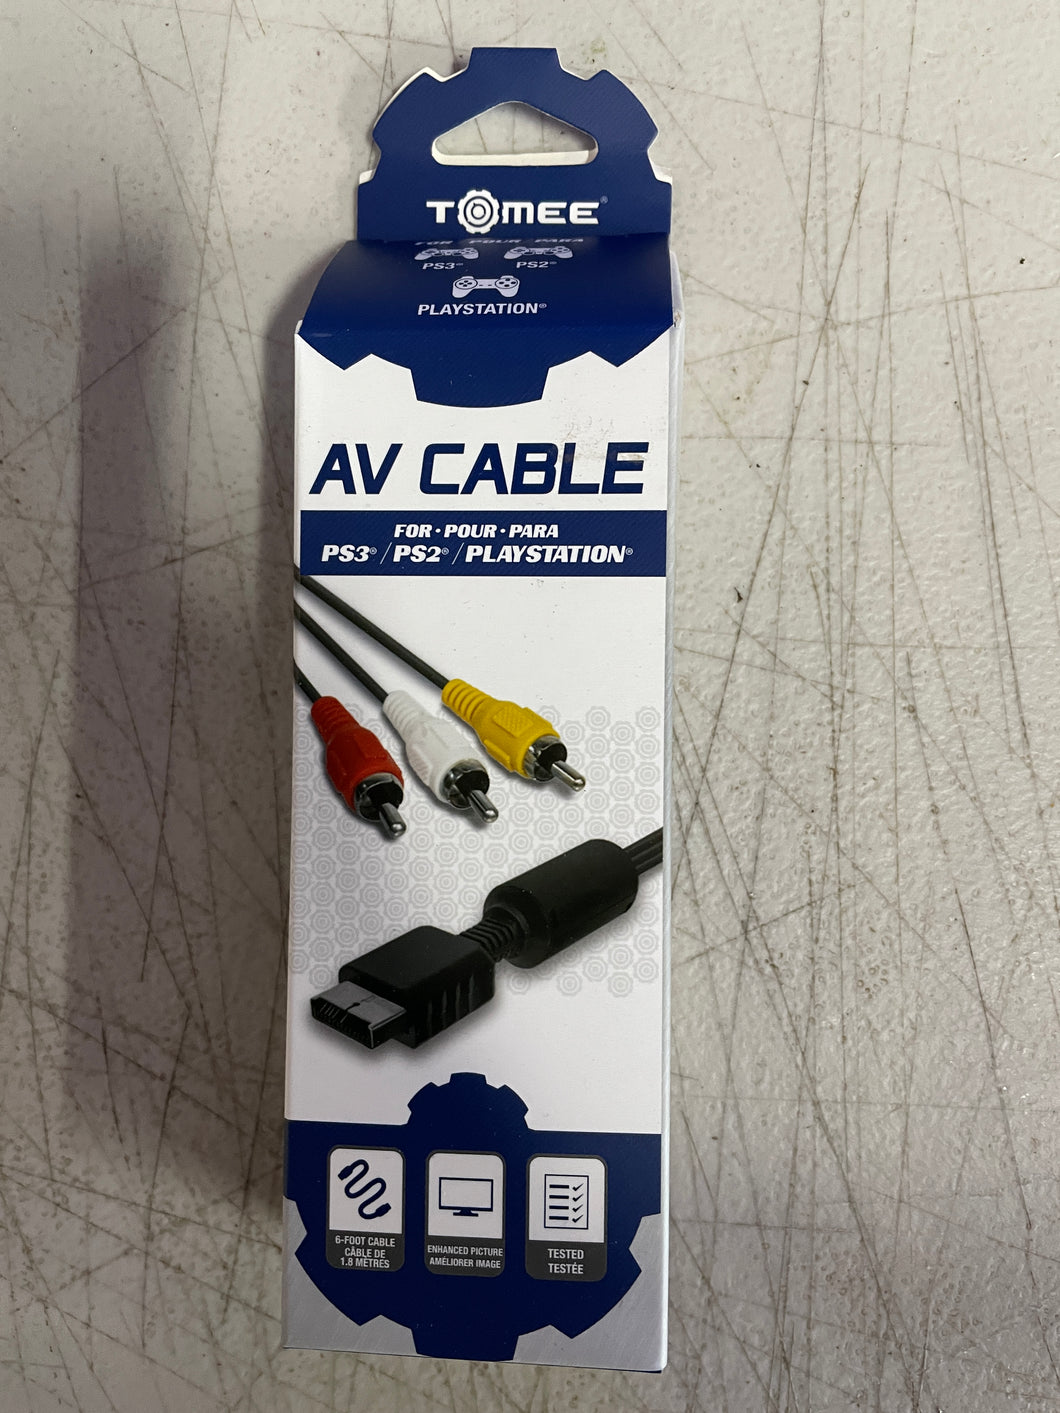 AV CABLE FOR PS3® / PS2® / PLAYSTATION